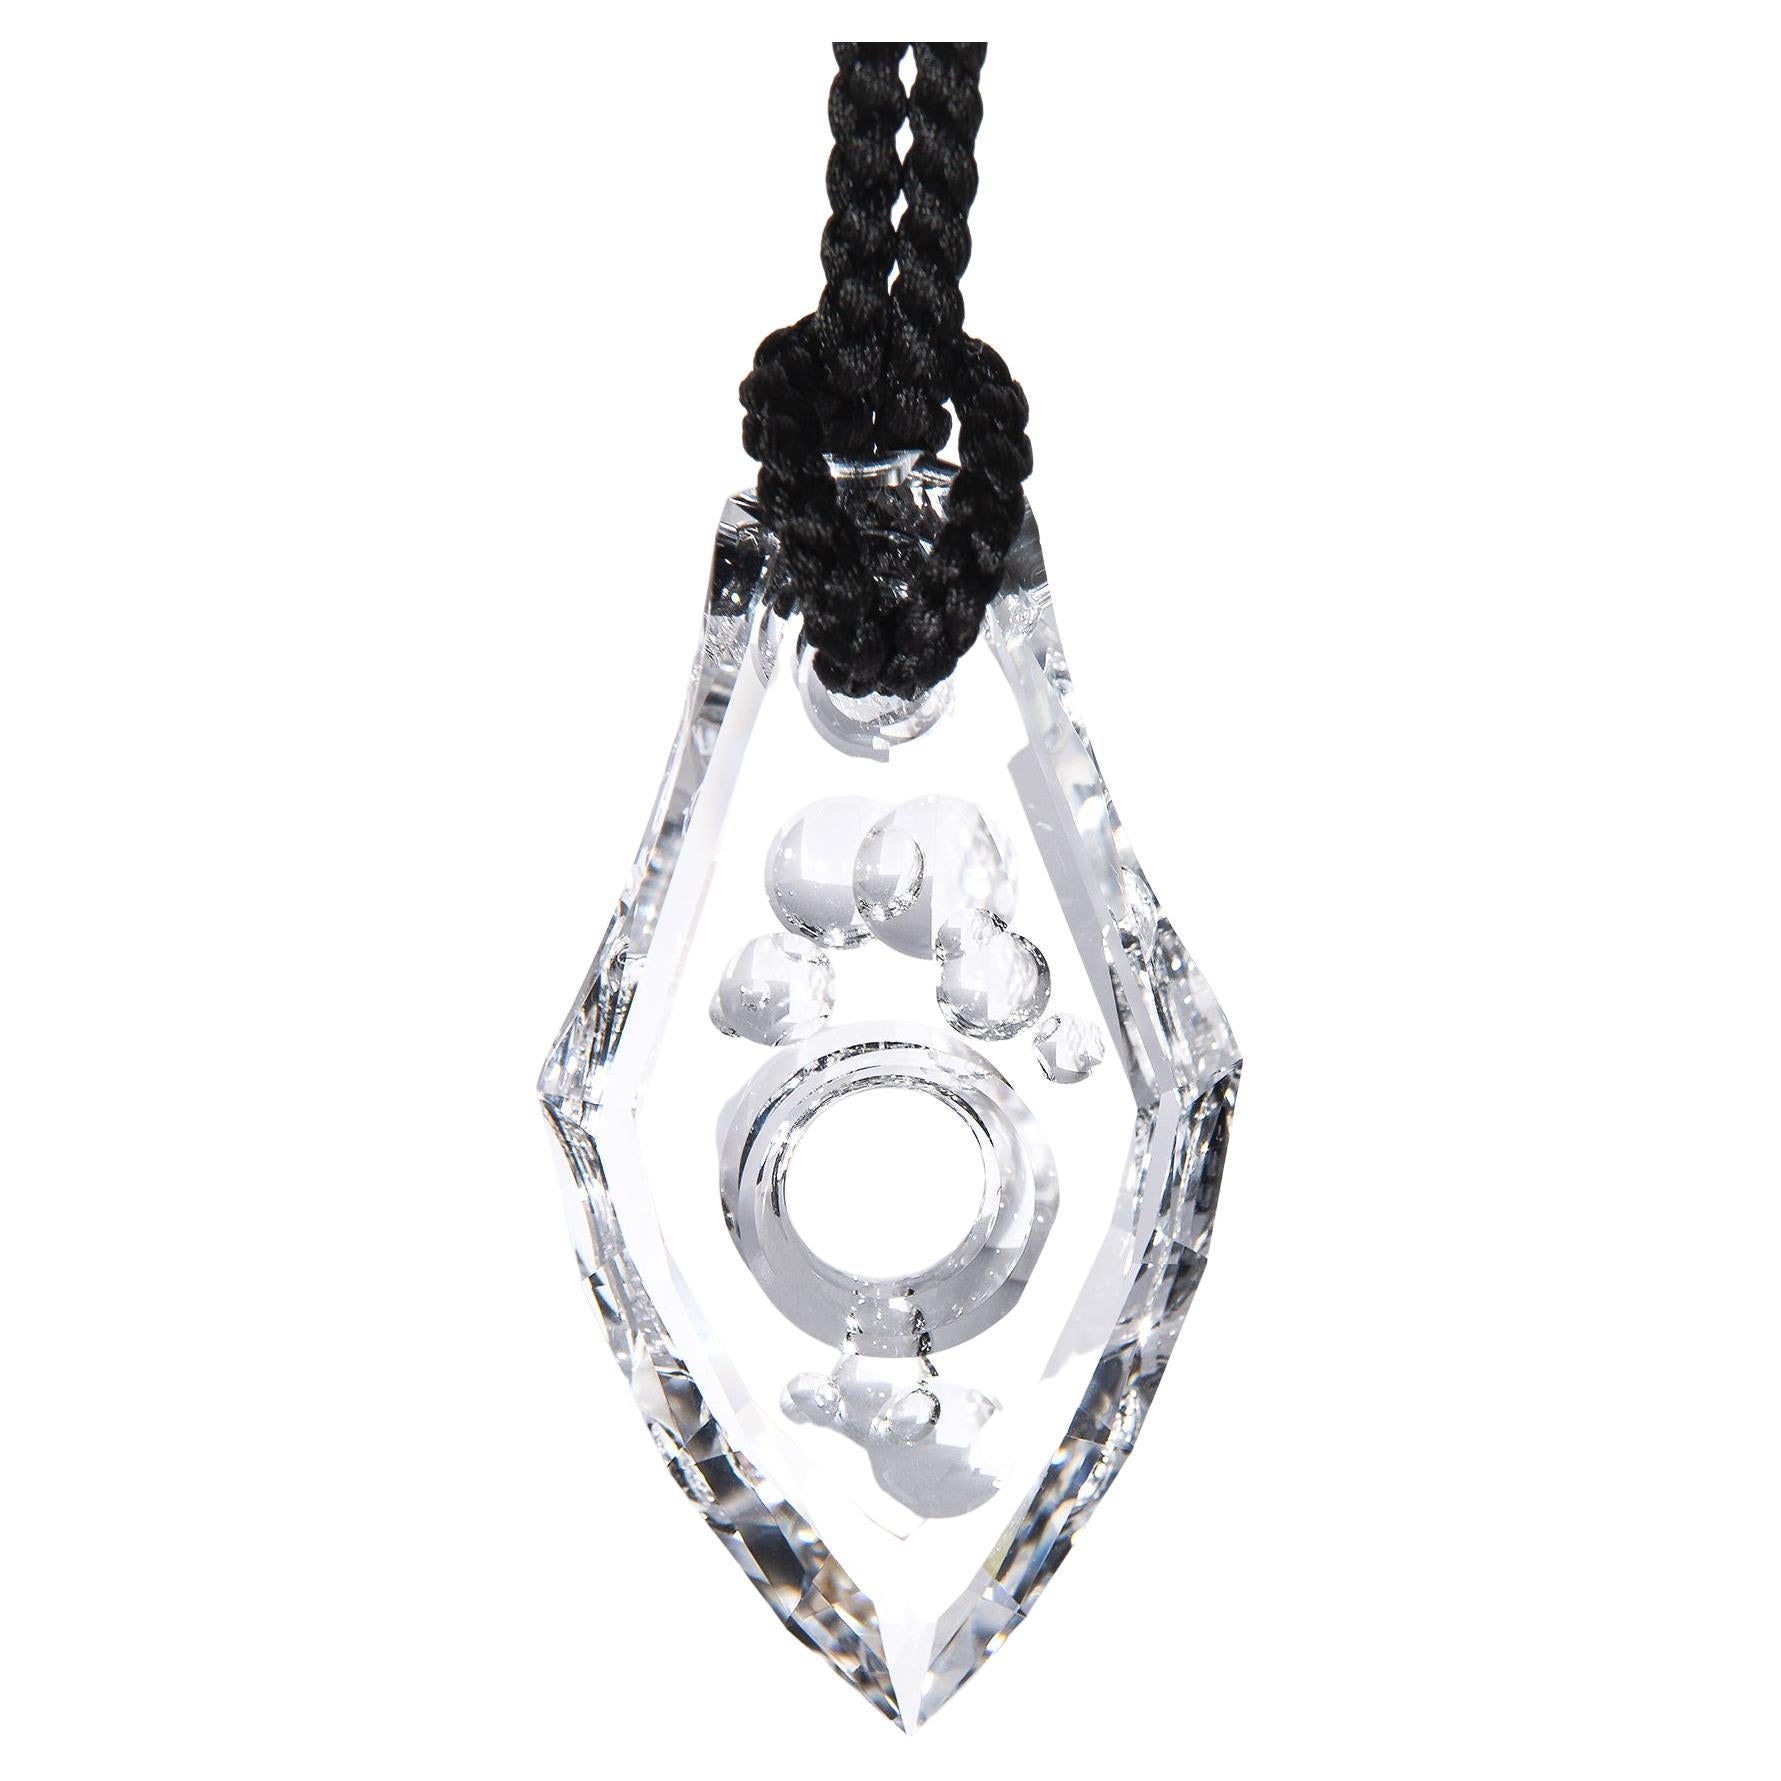 Rock crystal necklace made of stainless steel and precious stones